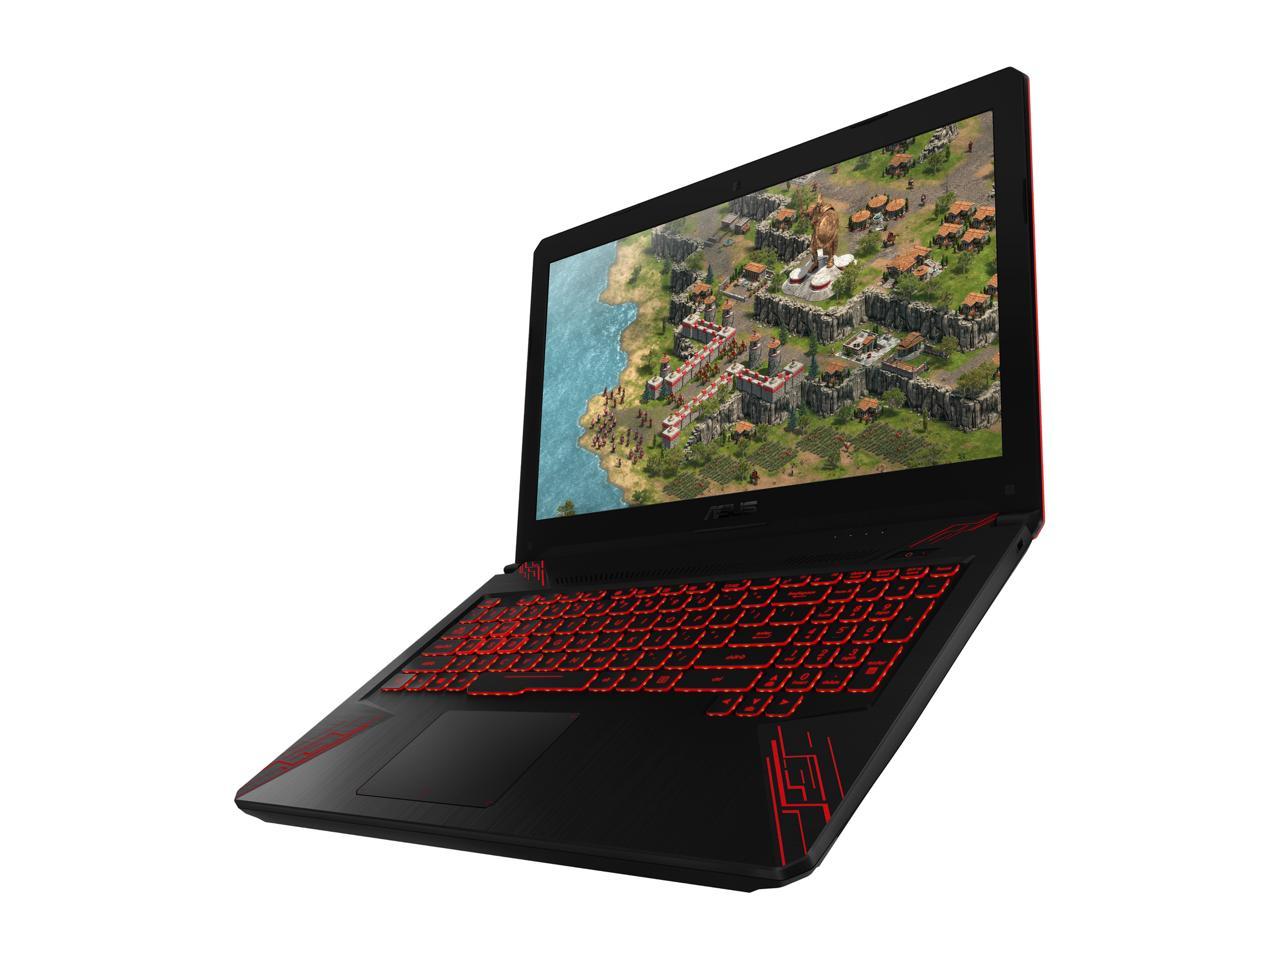 Asus tuf gaming intel core i5. ASUS TUF fx504gd. Ноутбук ASUS TUF Gaming fx504. ASUS TUF 504. ASUS fx504gd-e41023t.